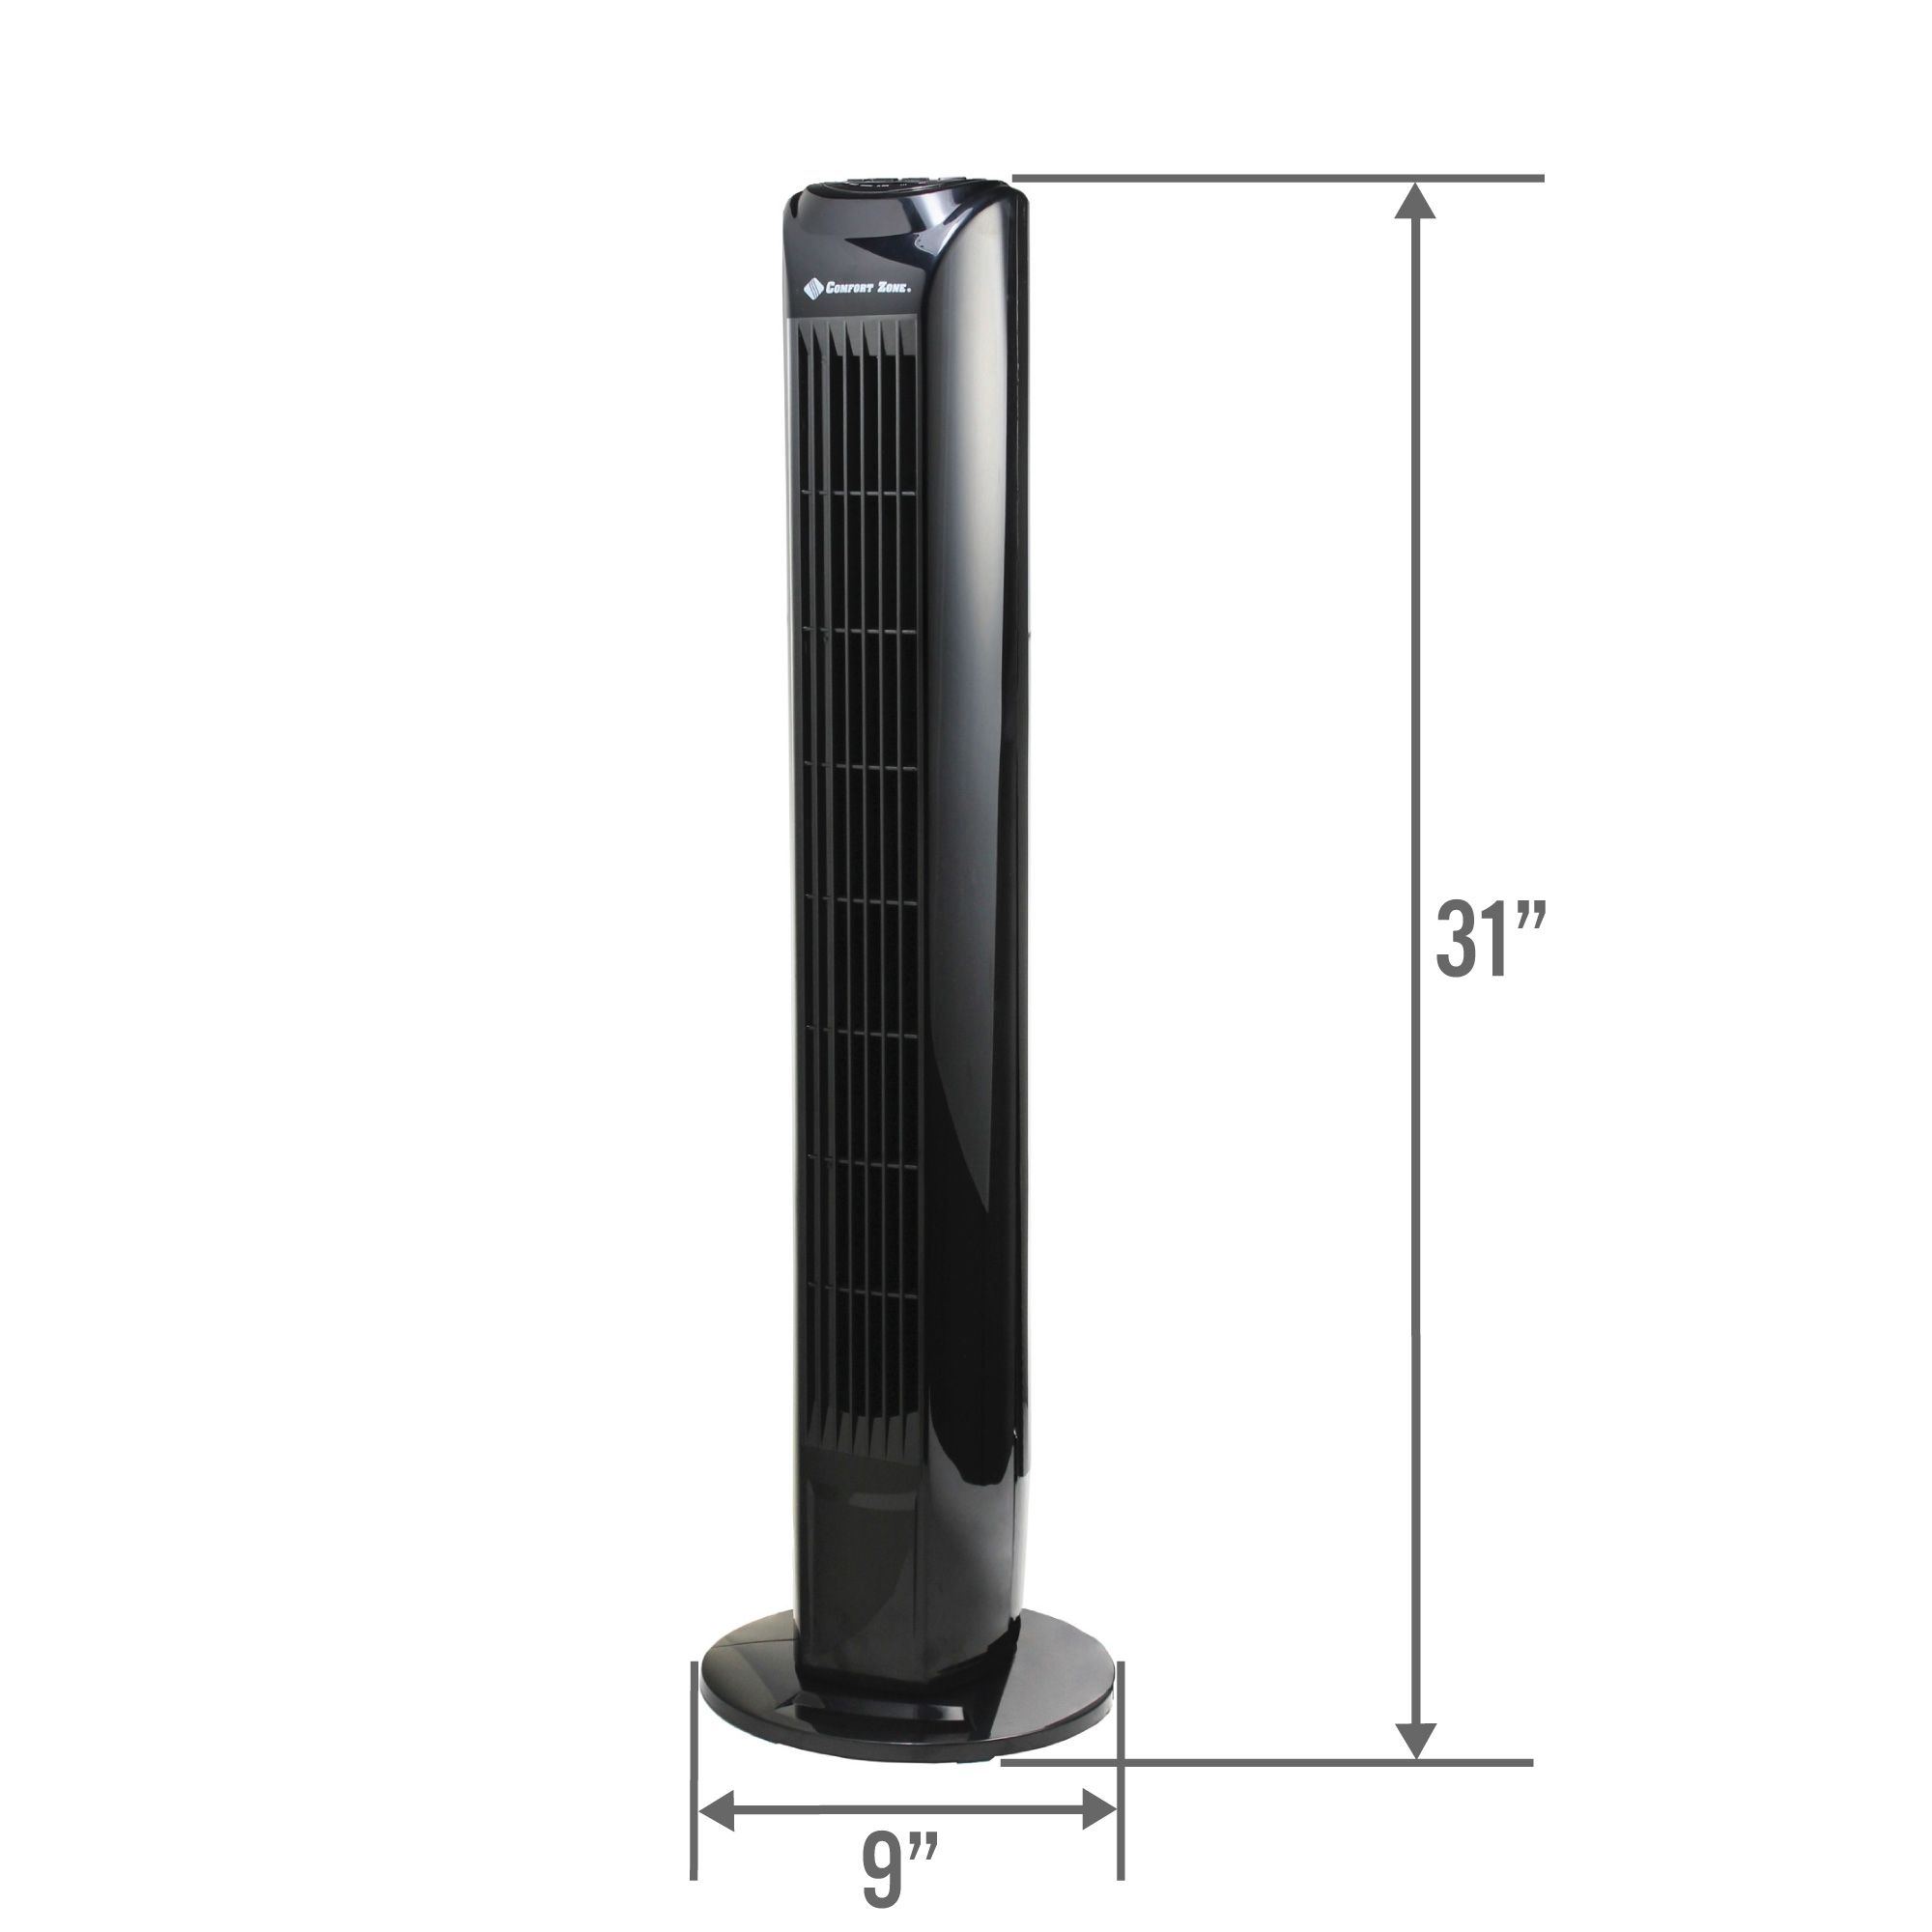 Comfort Zone Cztfr1bk Oscillating 31 Inch 3 Speed Tower Fan with regard to dimensions 2000 X 2000